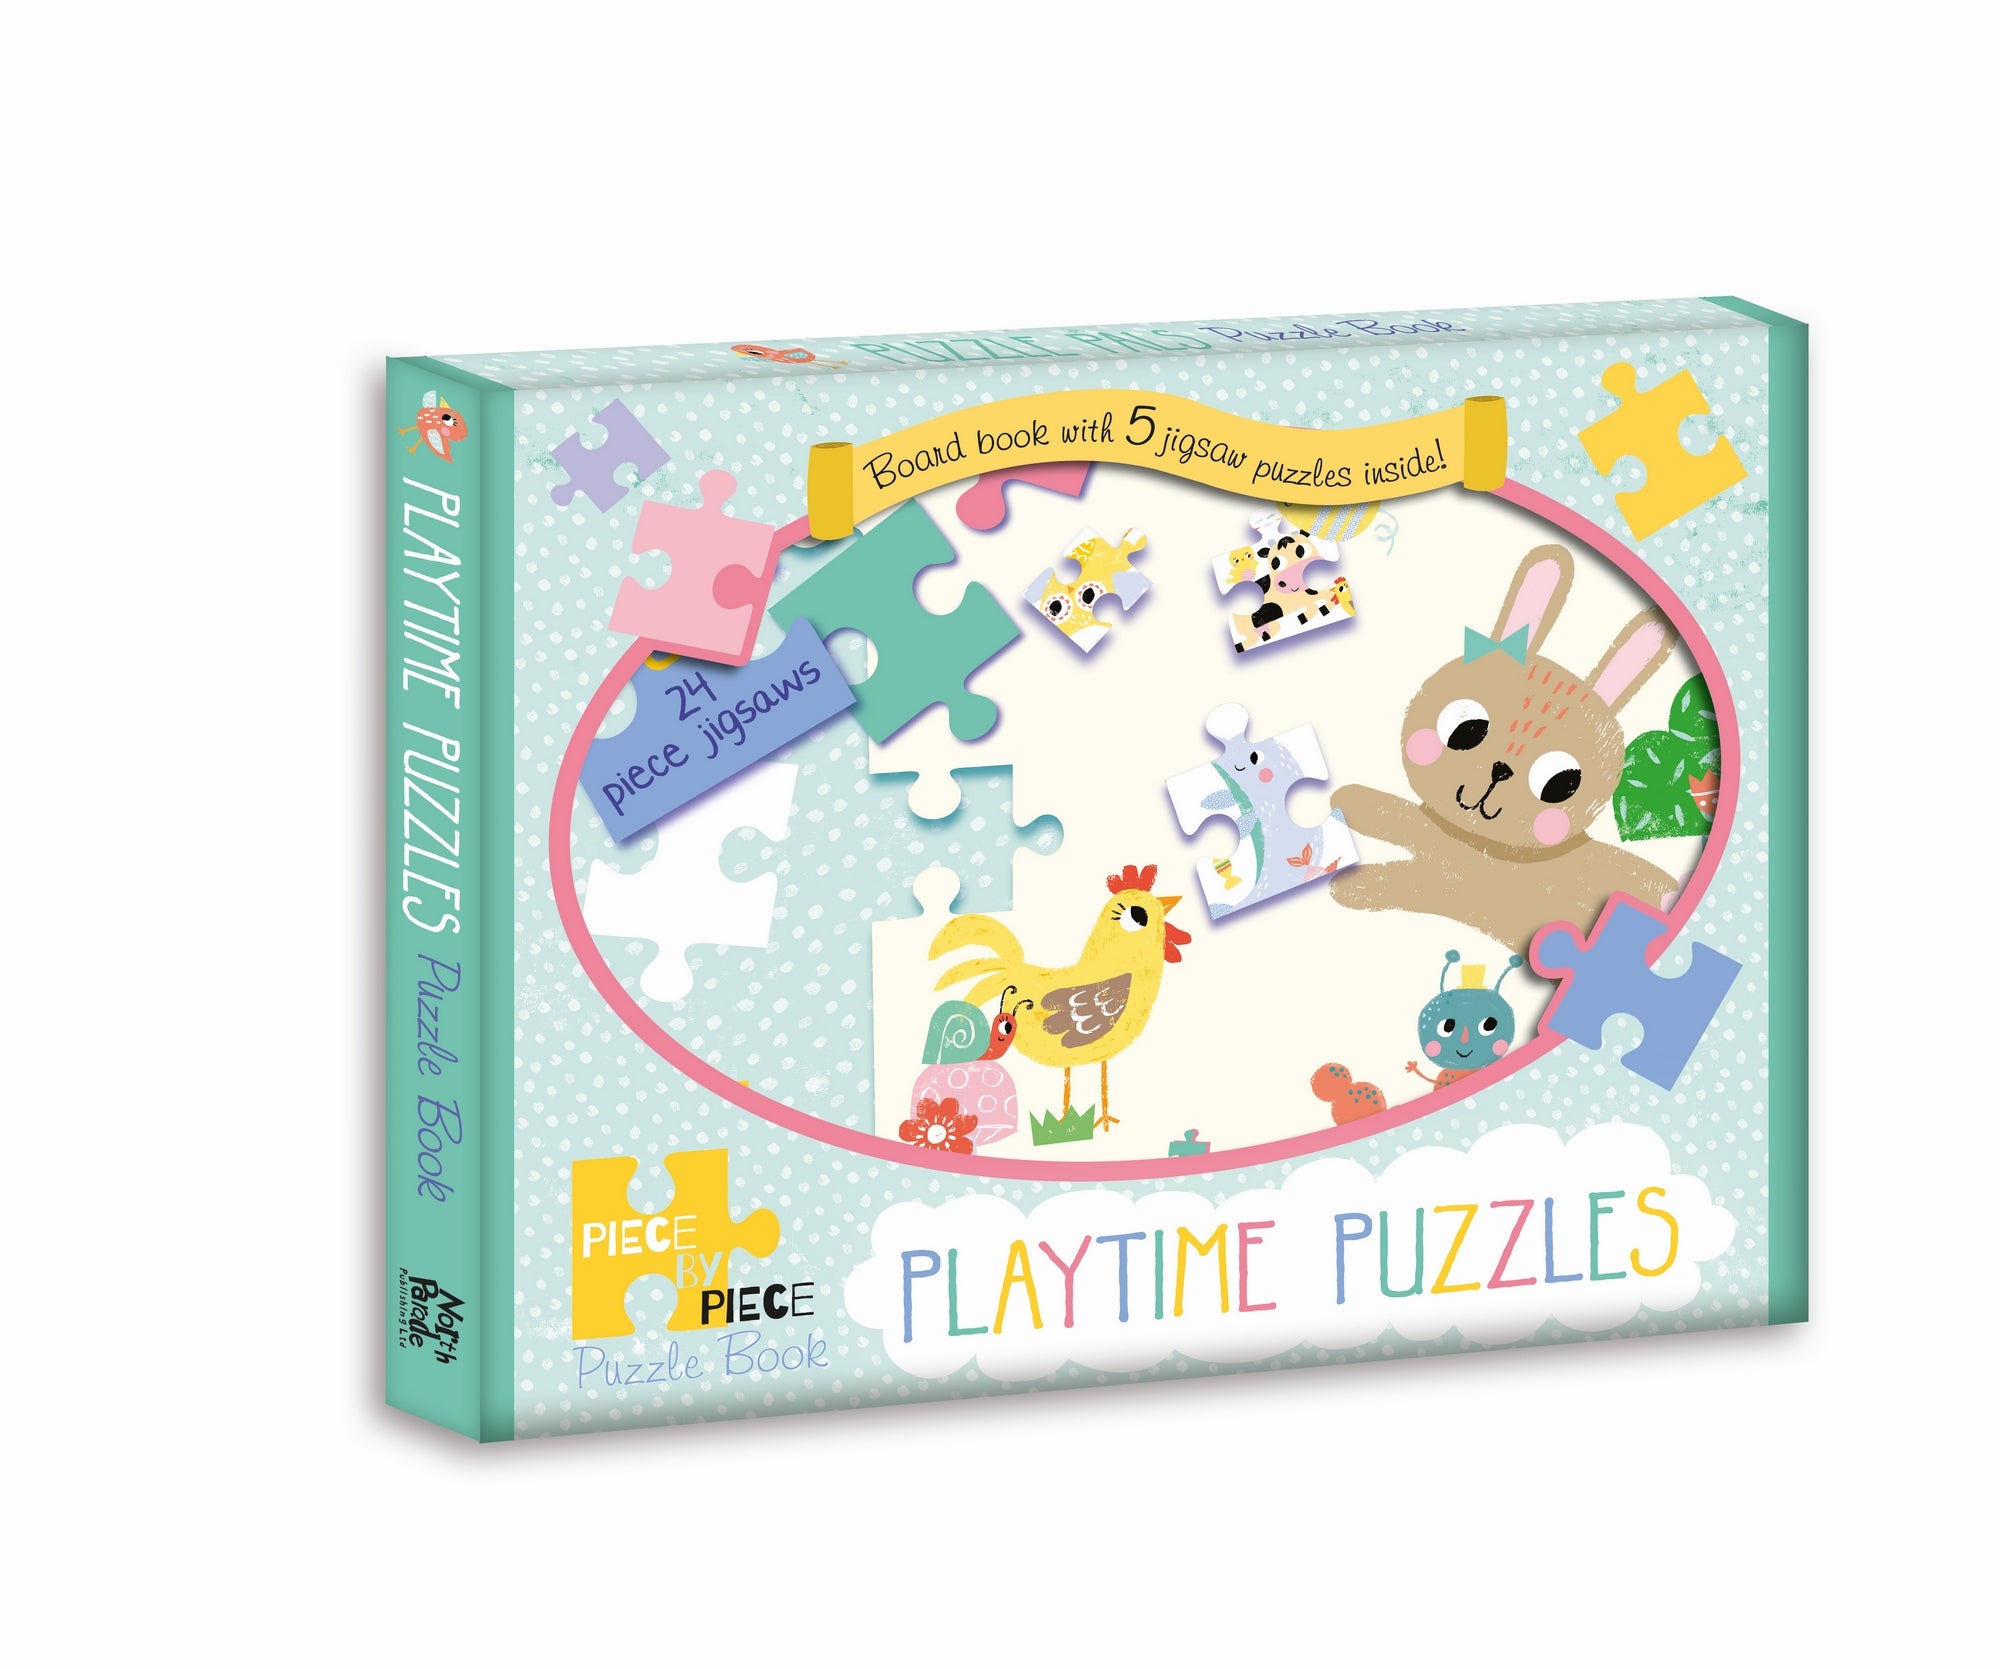 Jigsaw Books Playtime Puzzles Piece by Piece Puzzle